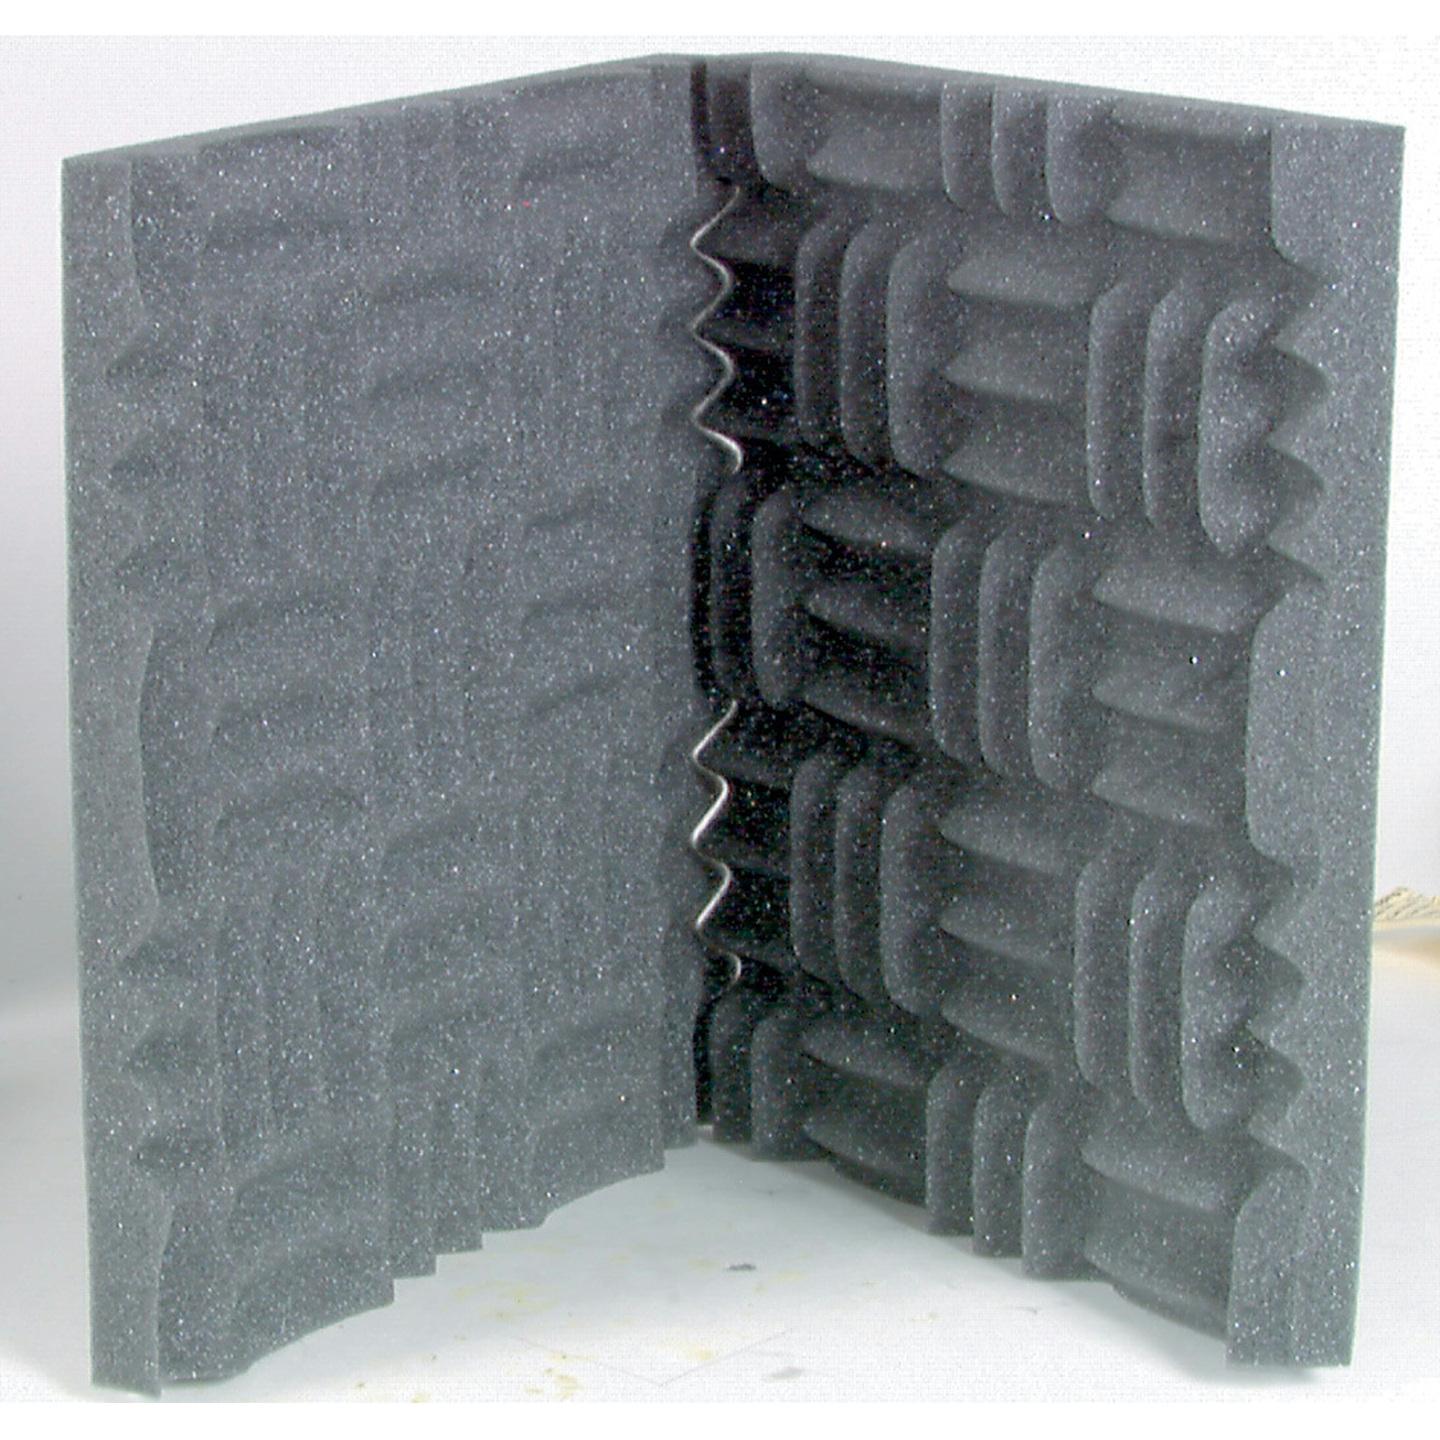 Sound Absorbing Acoustic Tiles - 25mm - Pair